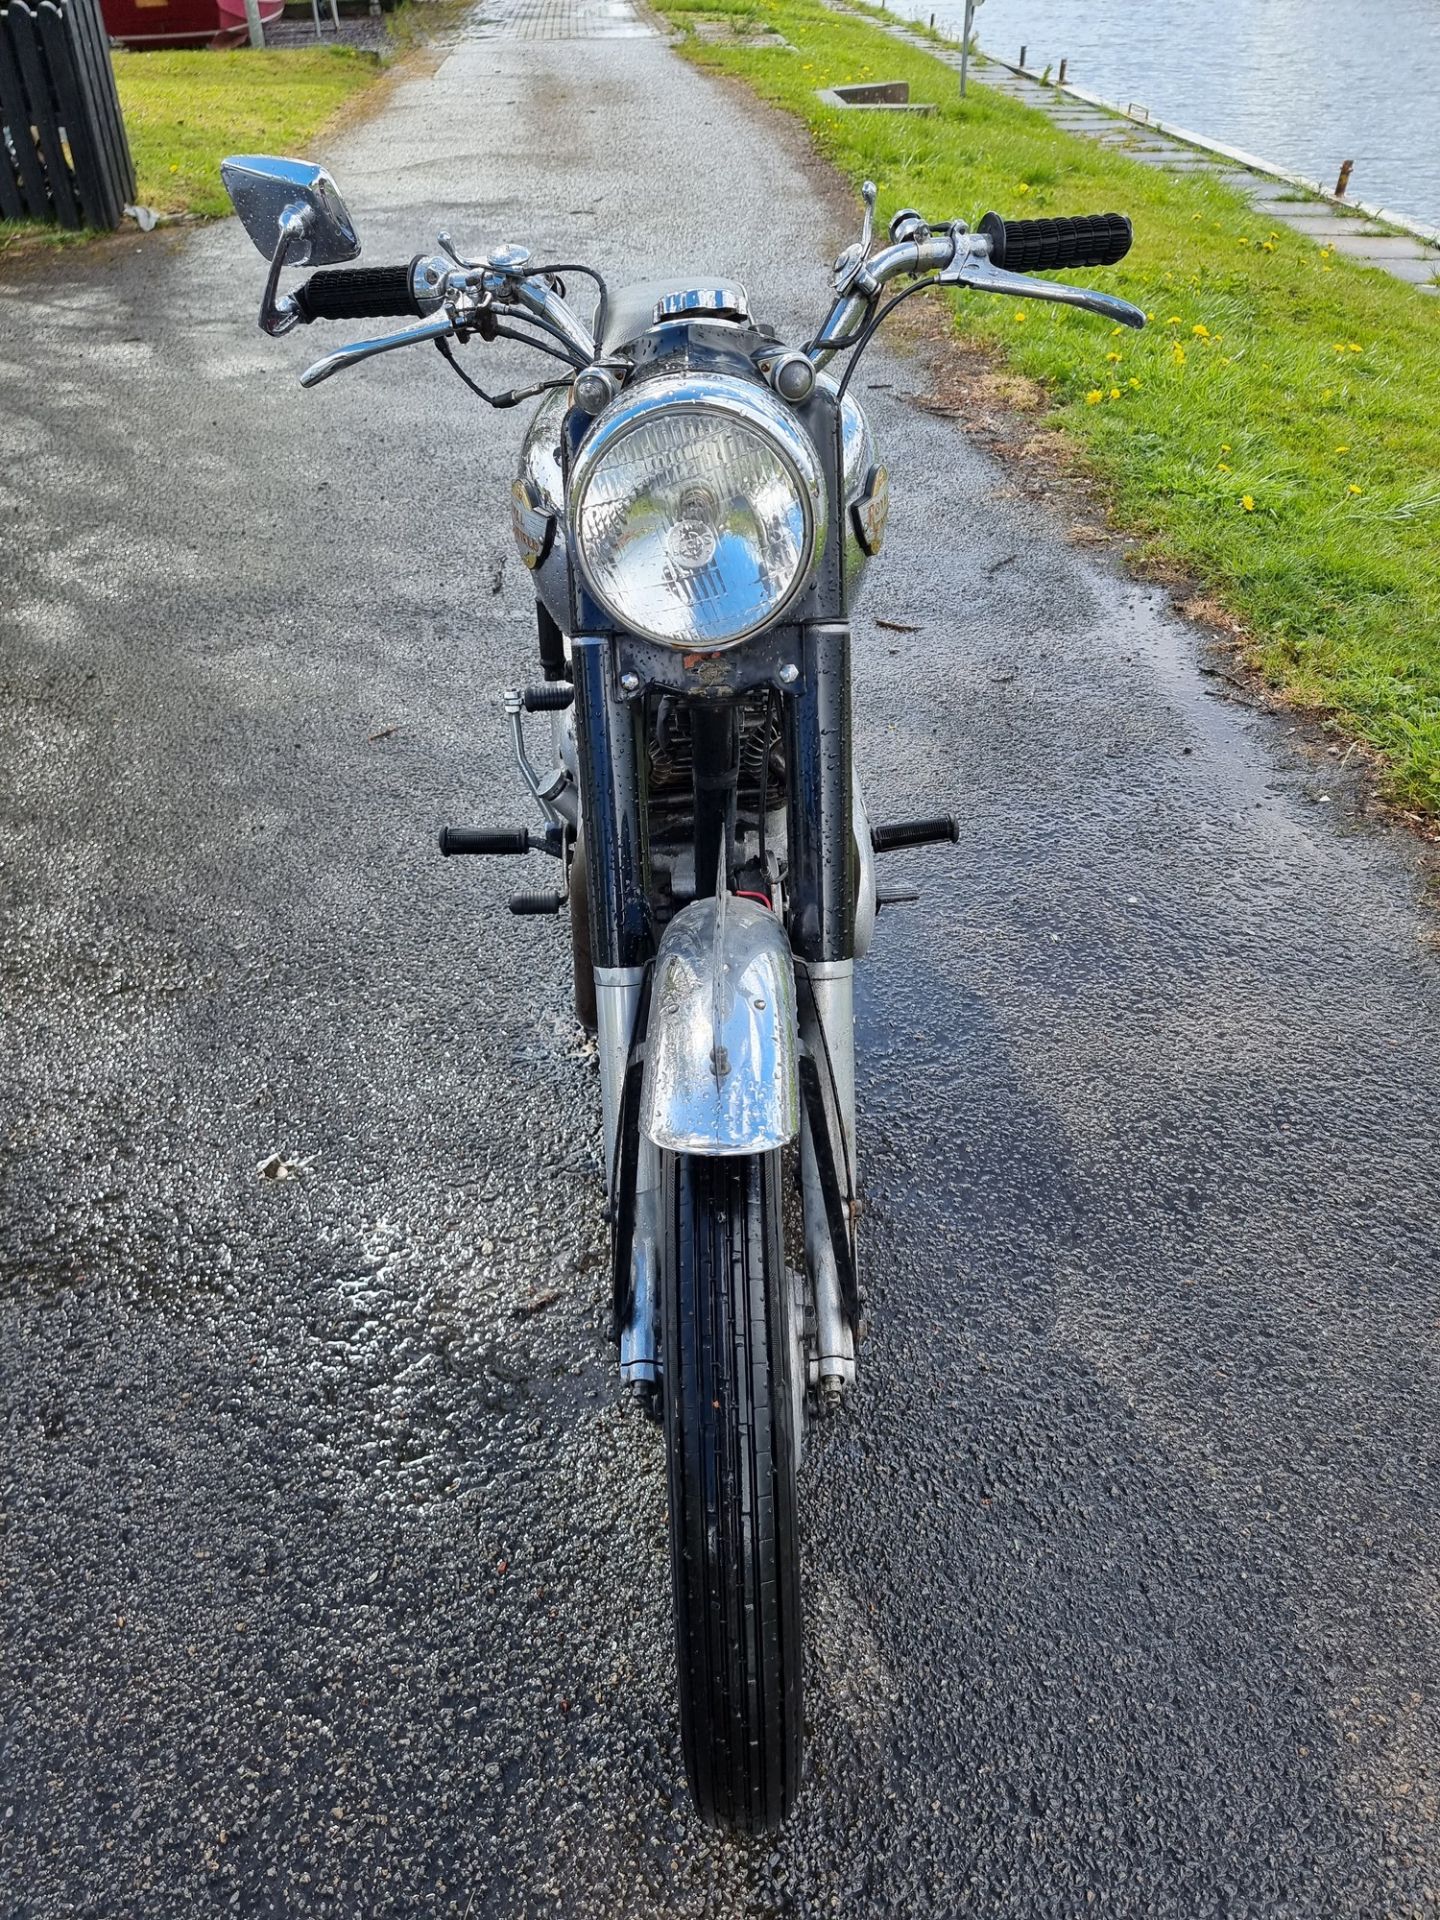 1958 Royal Enfield Constellation, 693 cc. Registration number 738 UXF (non transferrable). Frame - Image 3 of 16